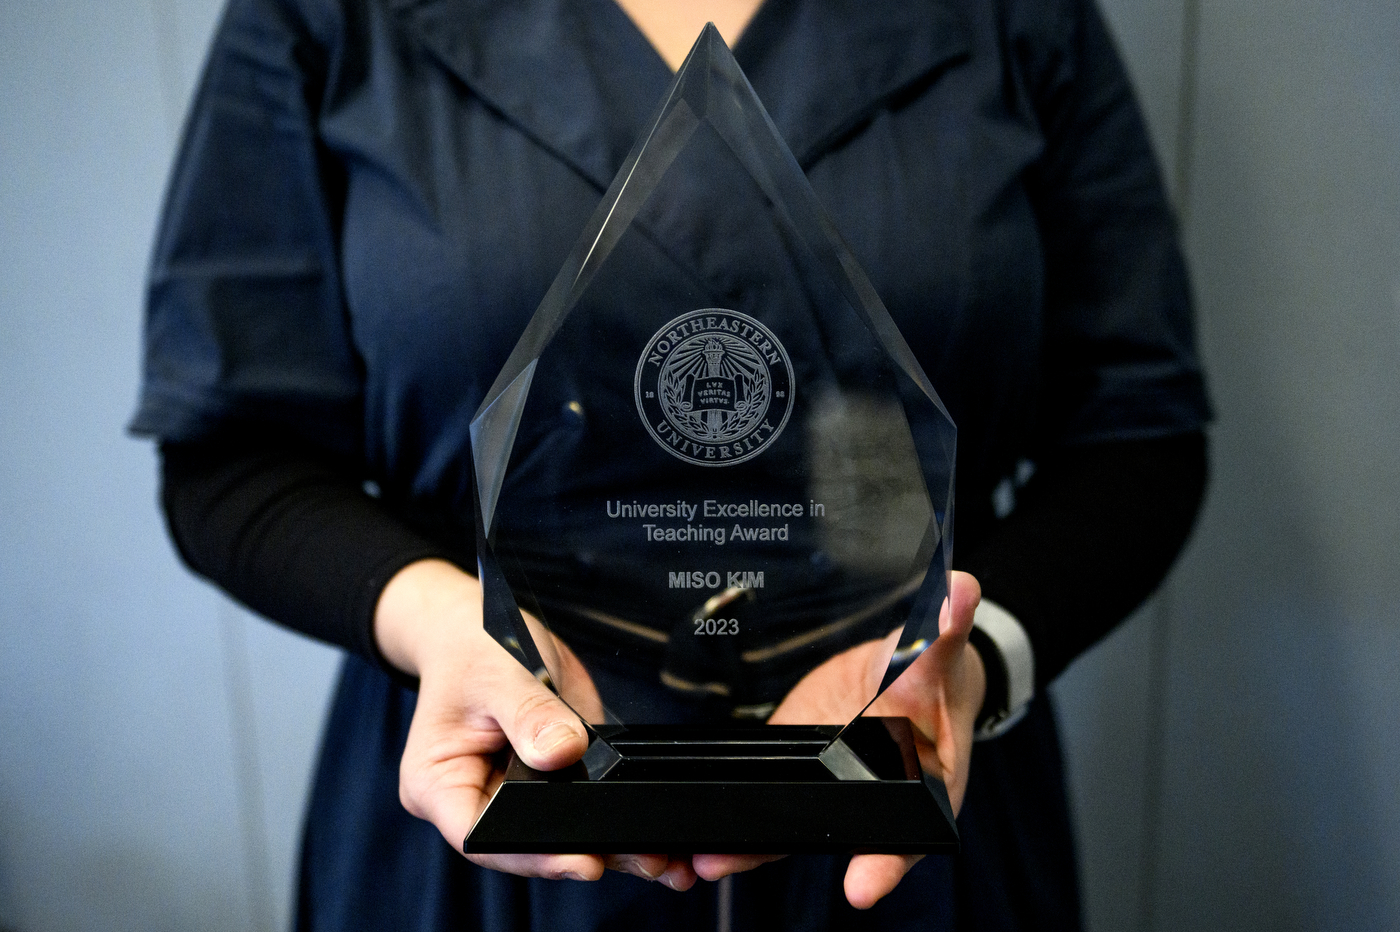 University Excellence in Teaching award